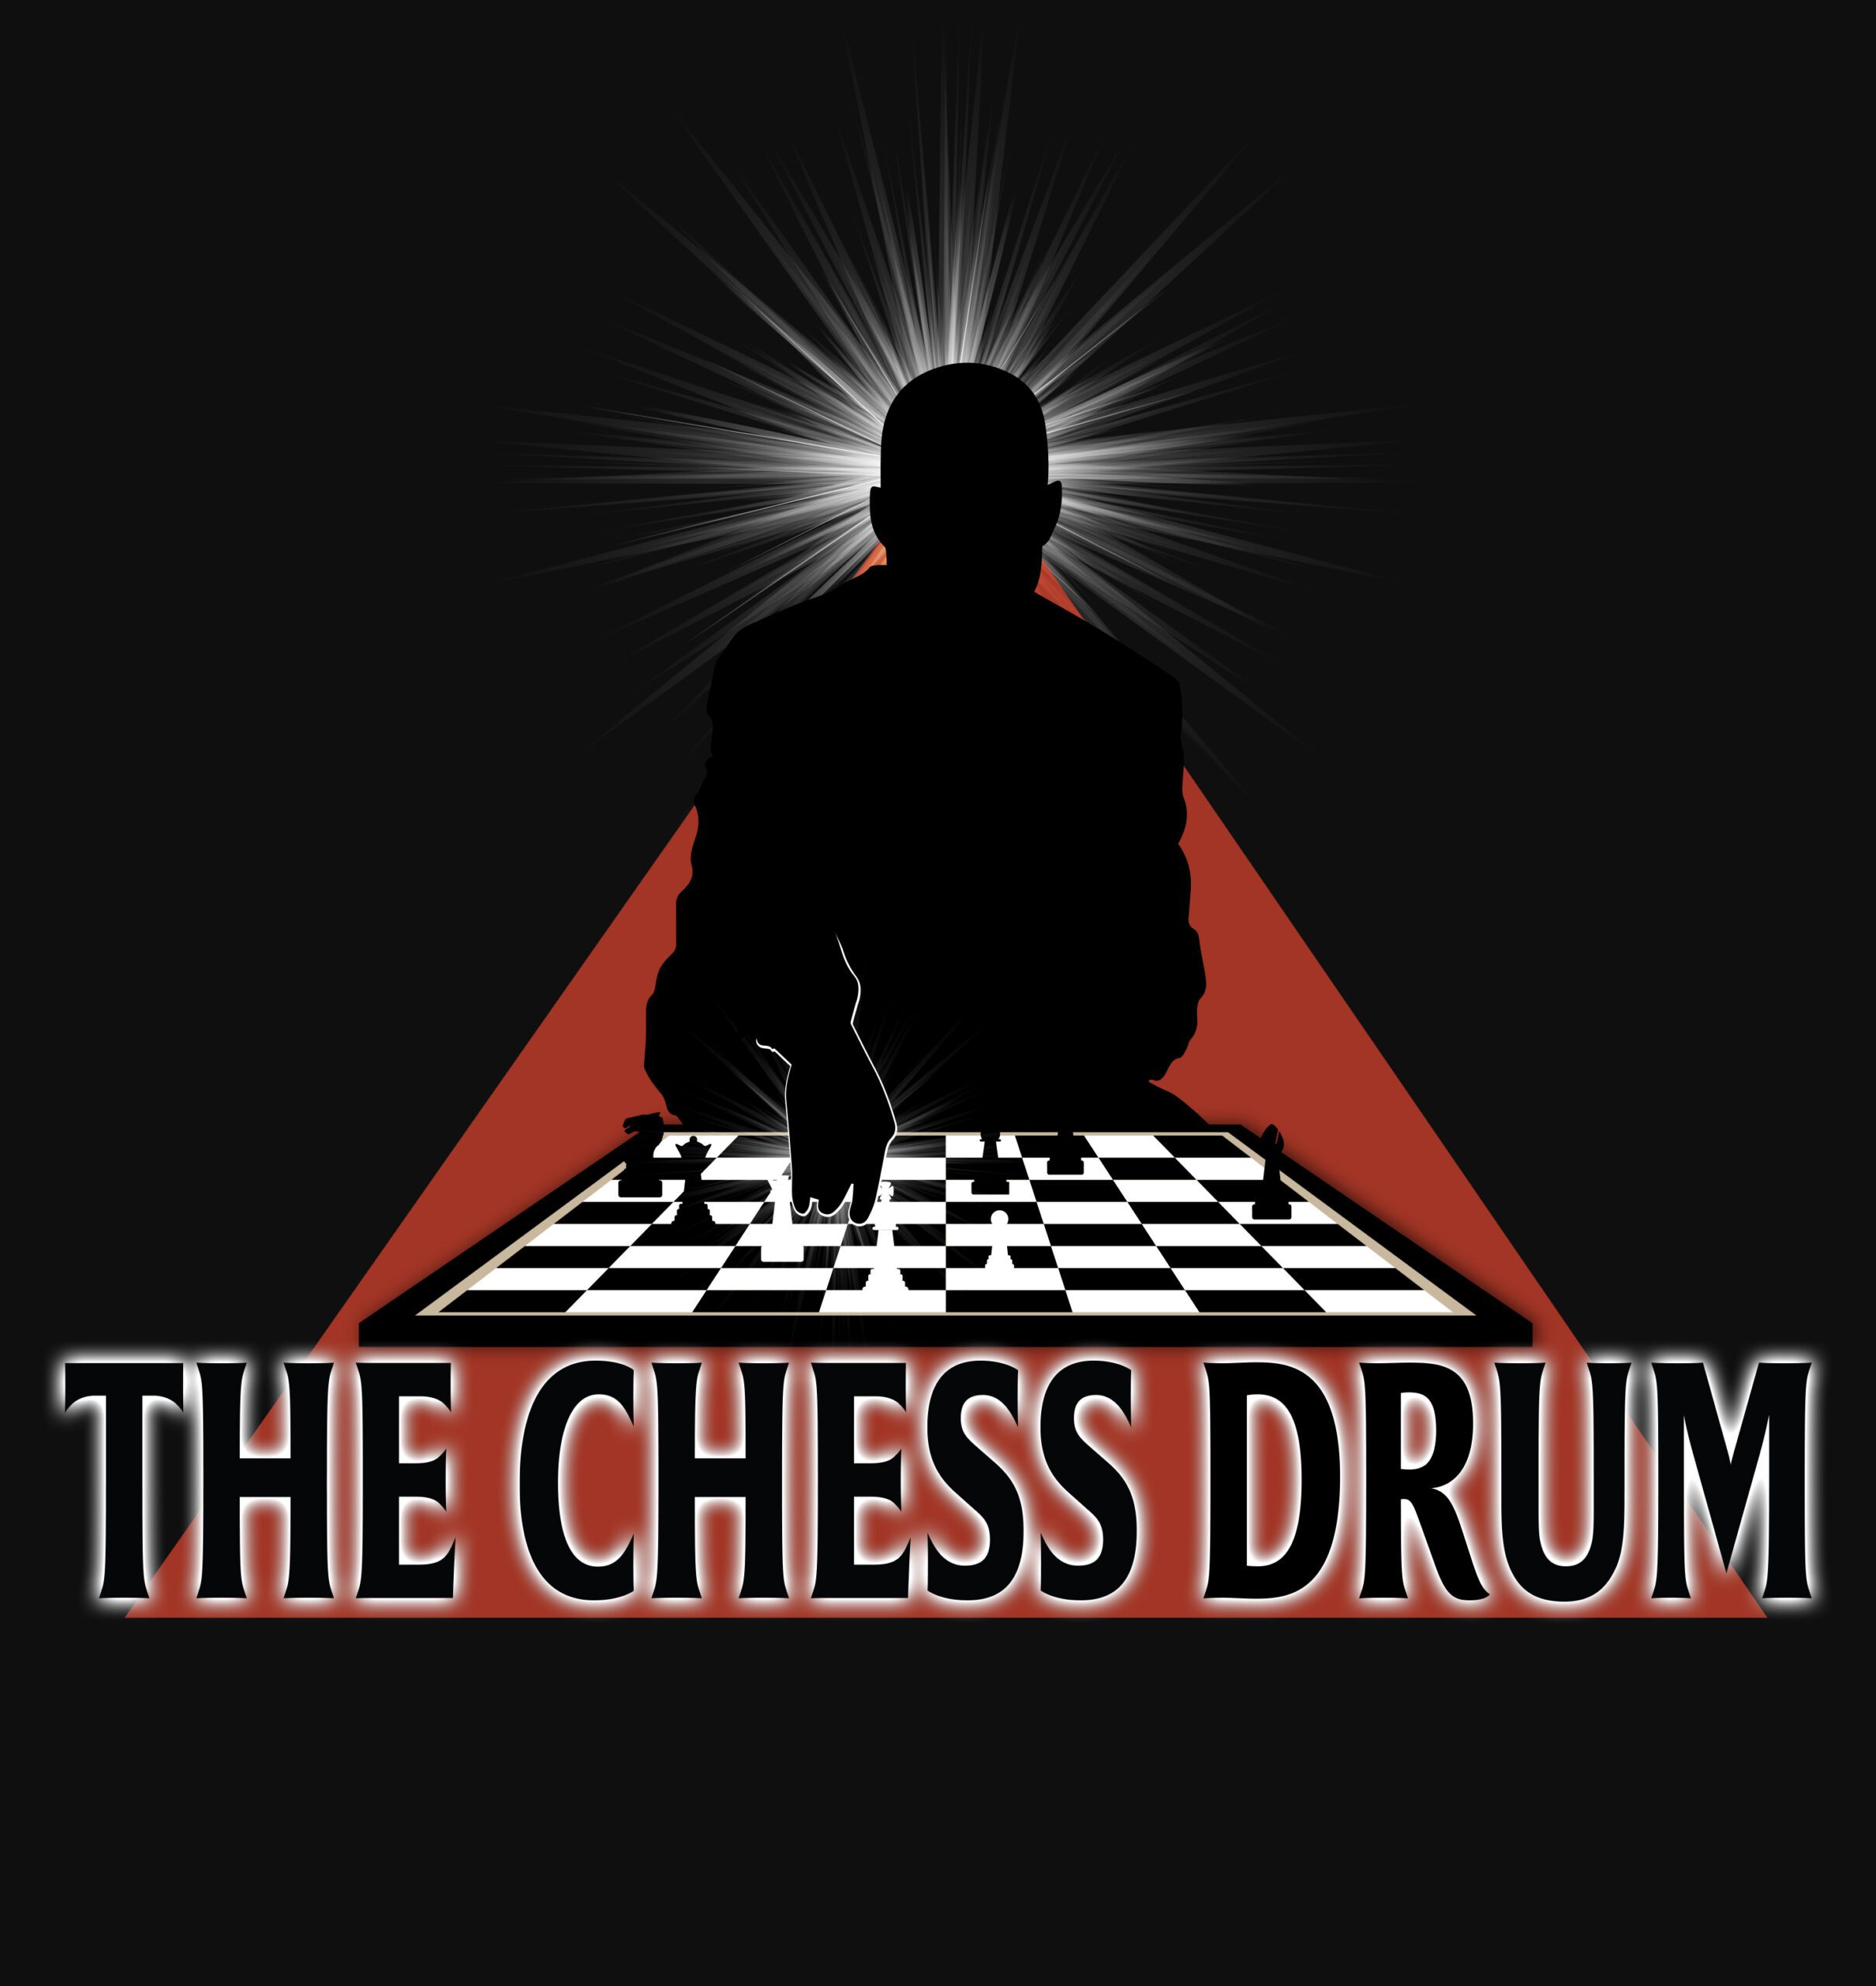 The Chess Drum